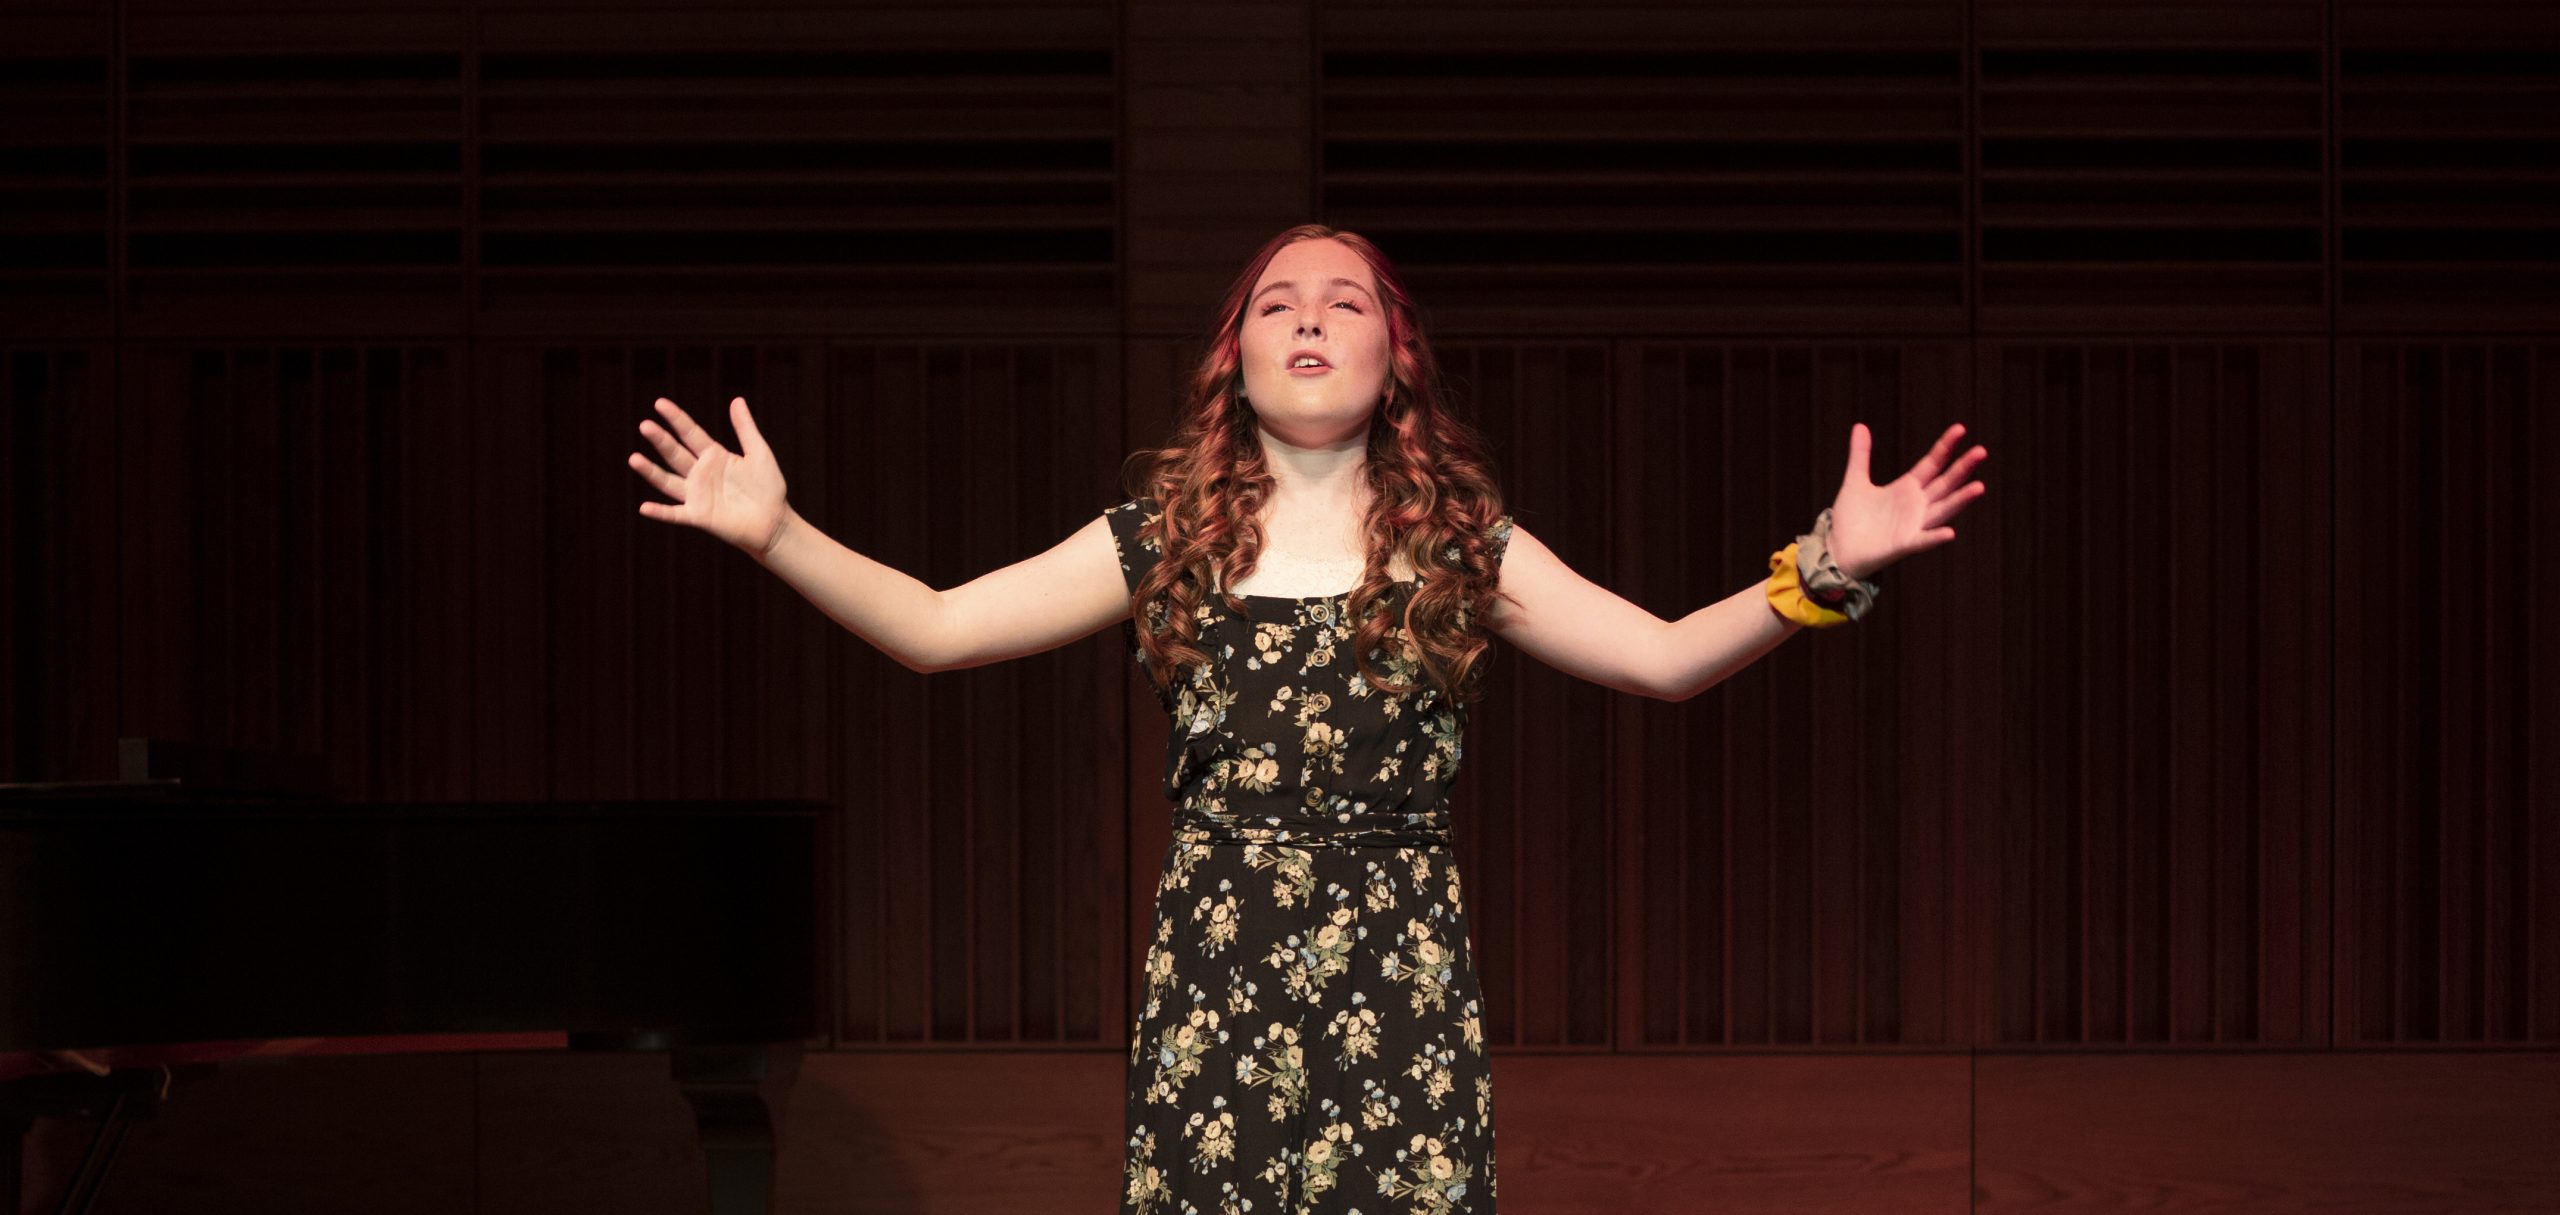 Girl singing with arms outstretched